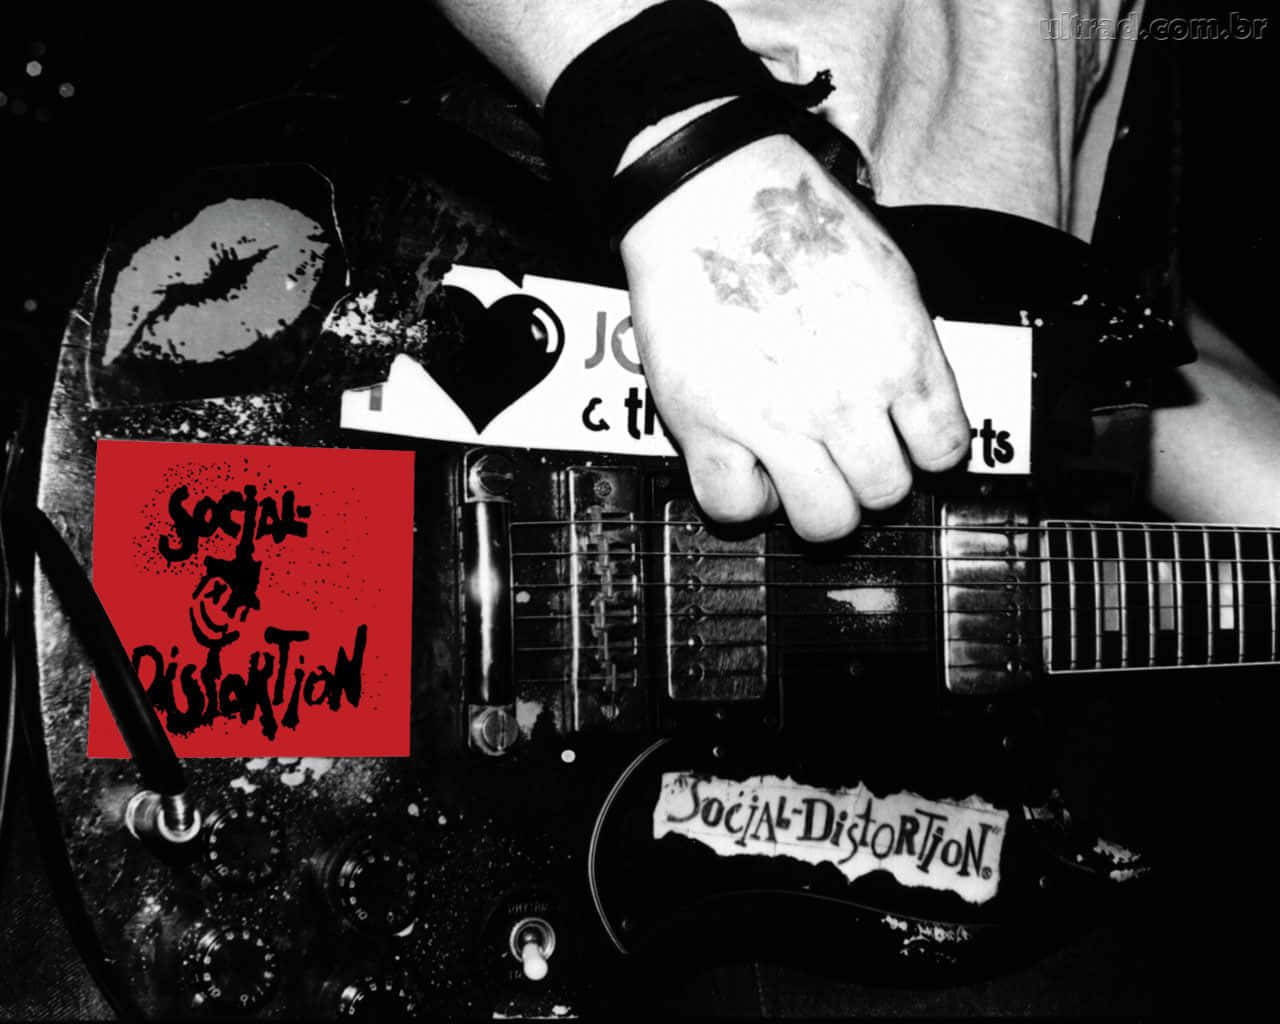 Power Of Punk - A Glimpse Into A Social Distortion Concert Background